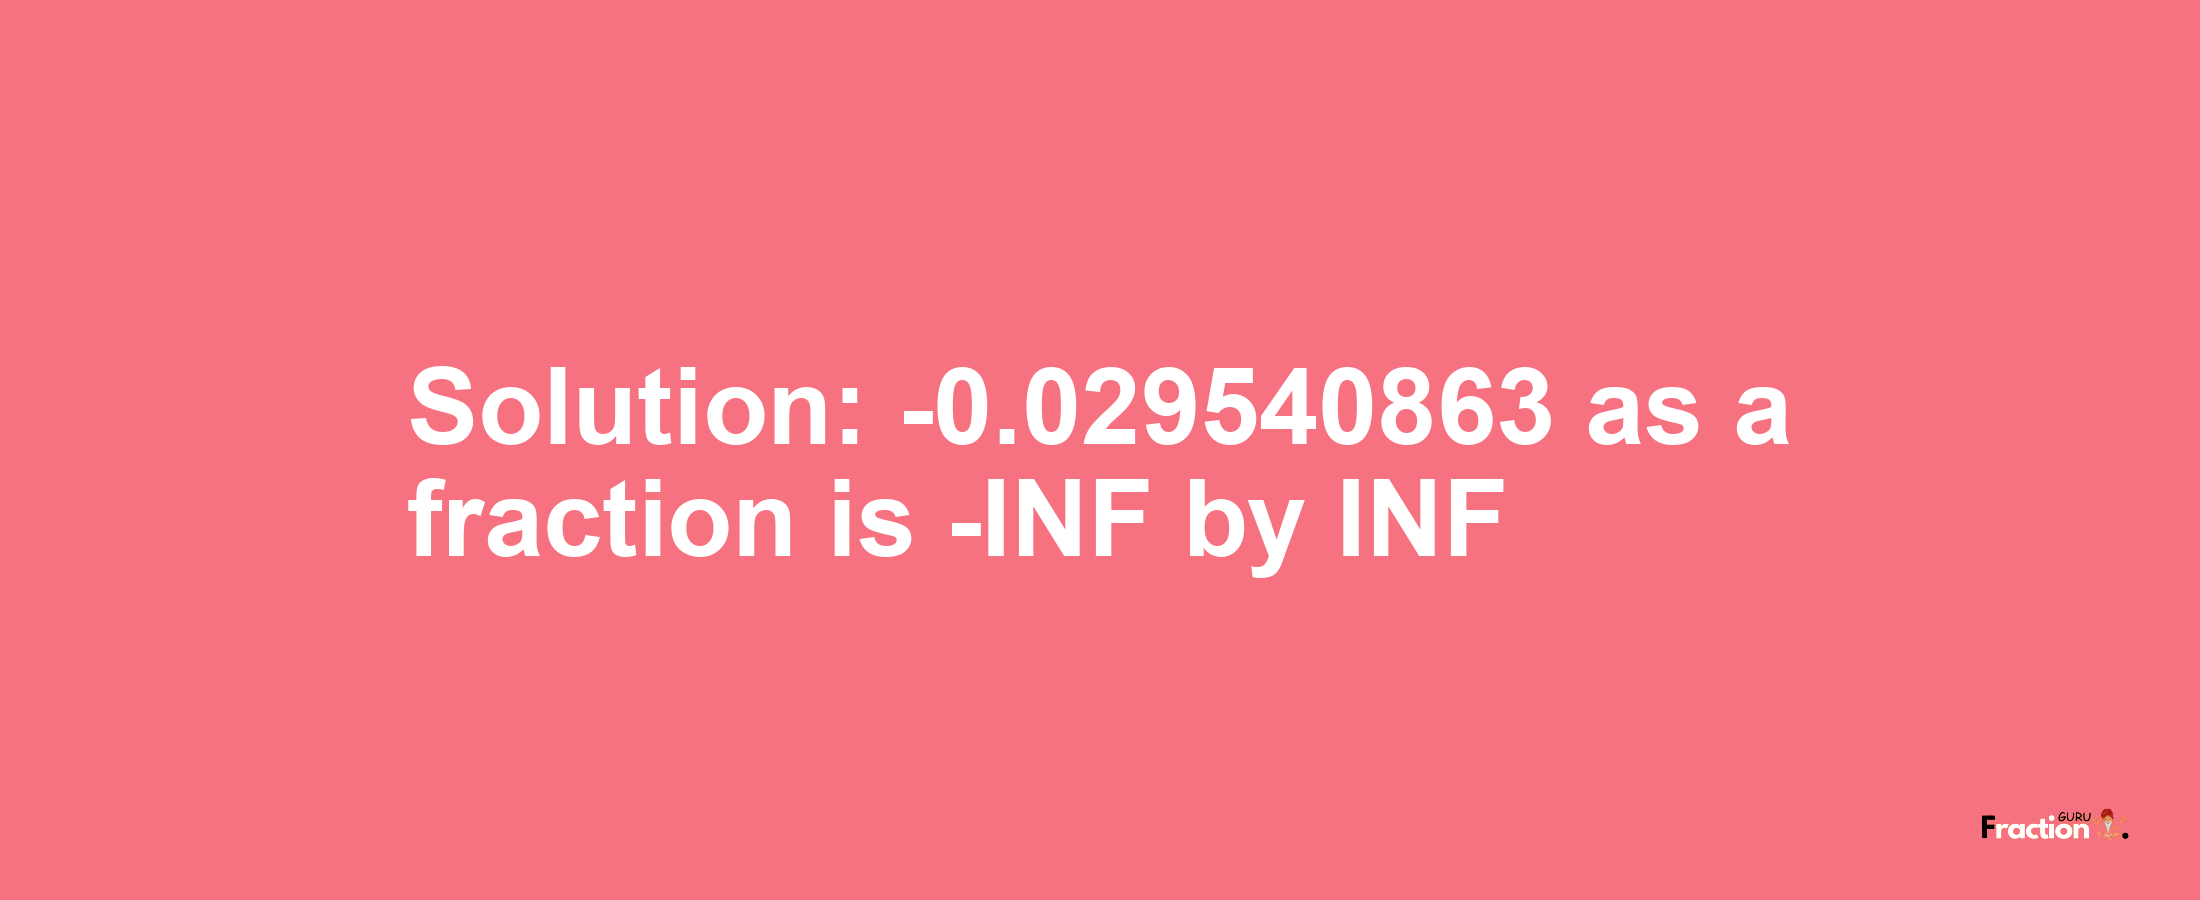 Solution:-0.029540863 as a fraction is -INF/INF